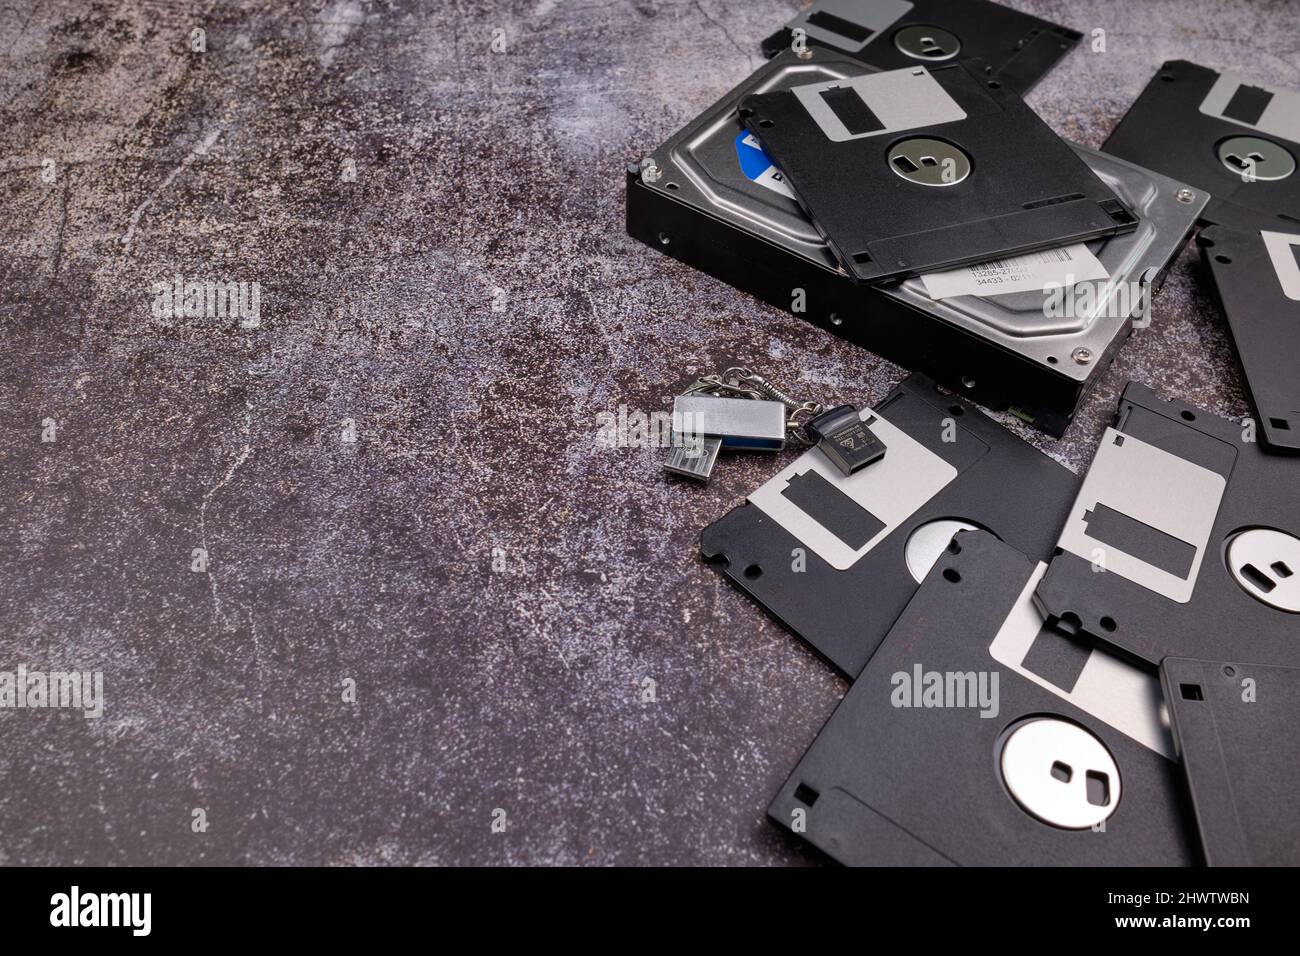 Technological background formed by different components of a computer on a table with a color similar to cement and with empty space. Stock Photo